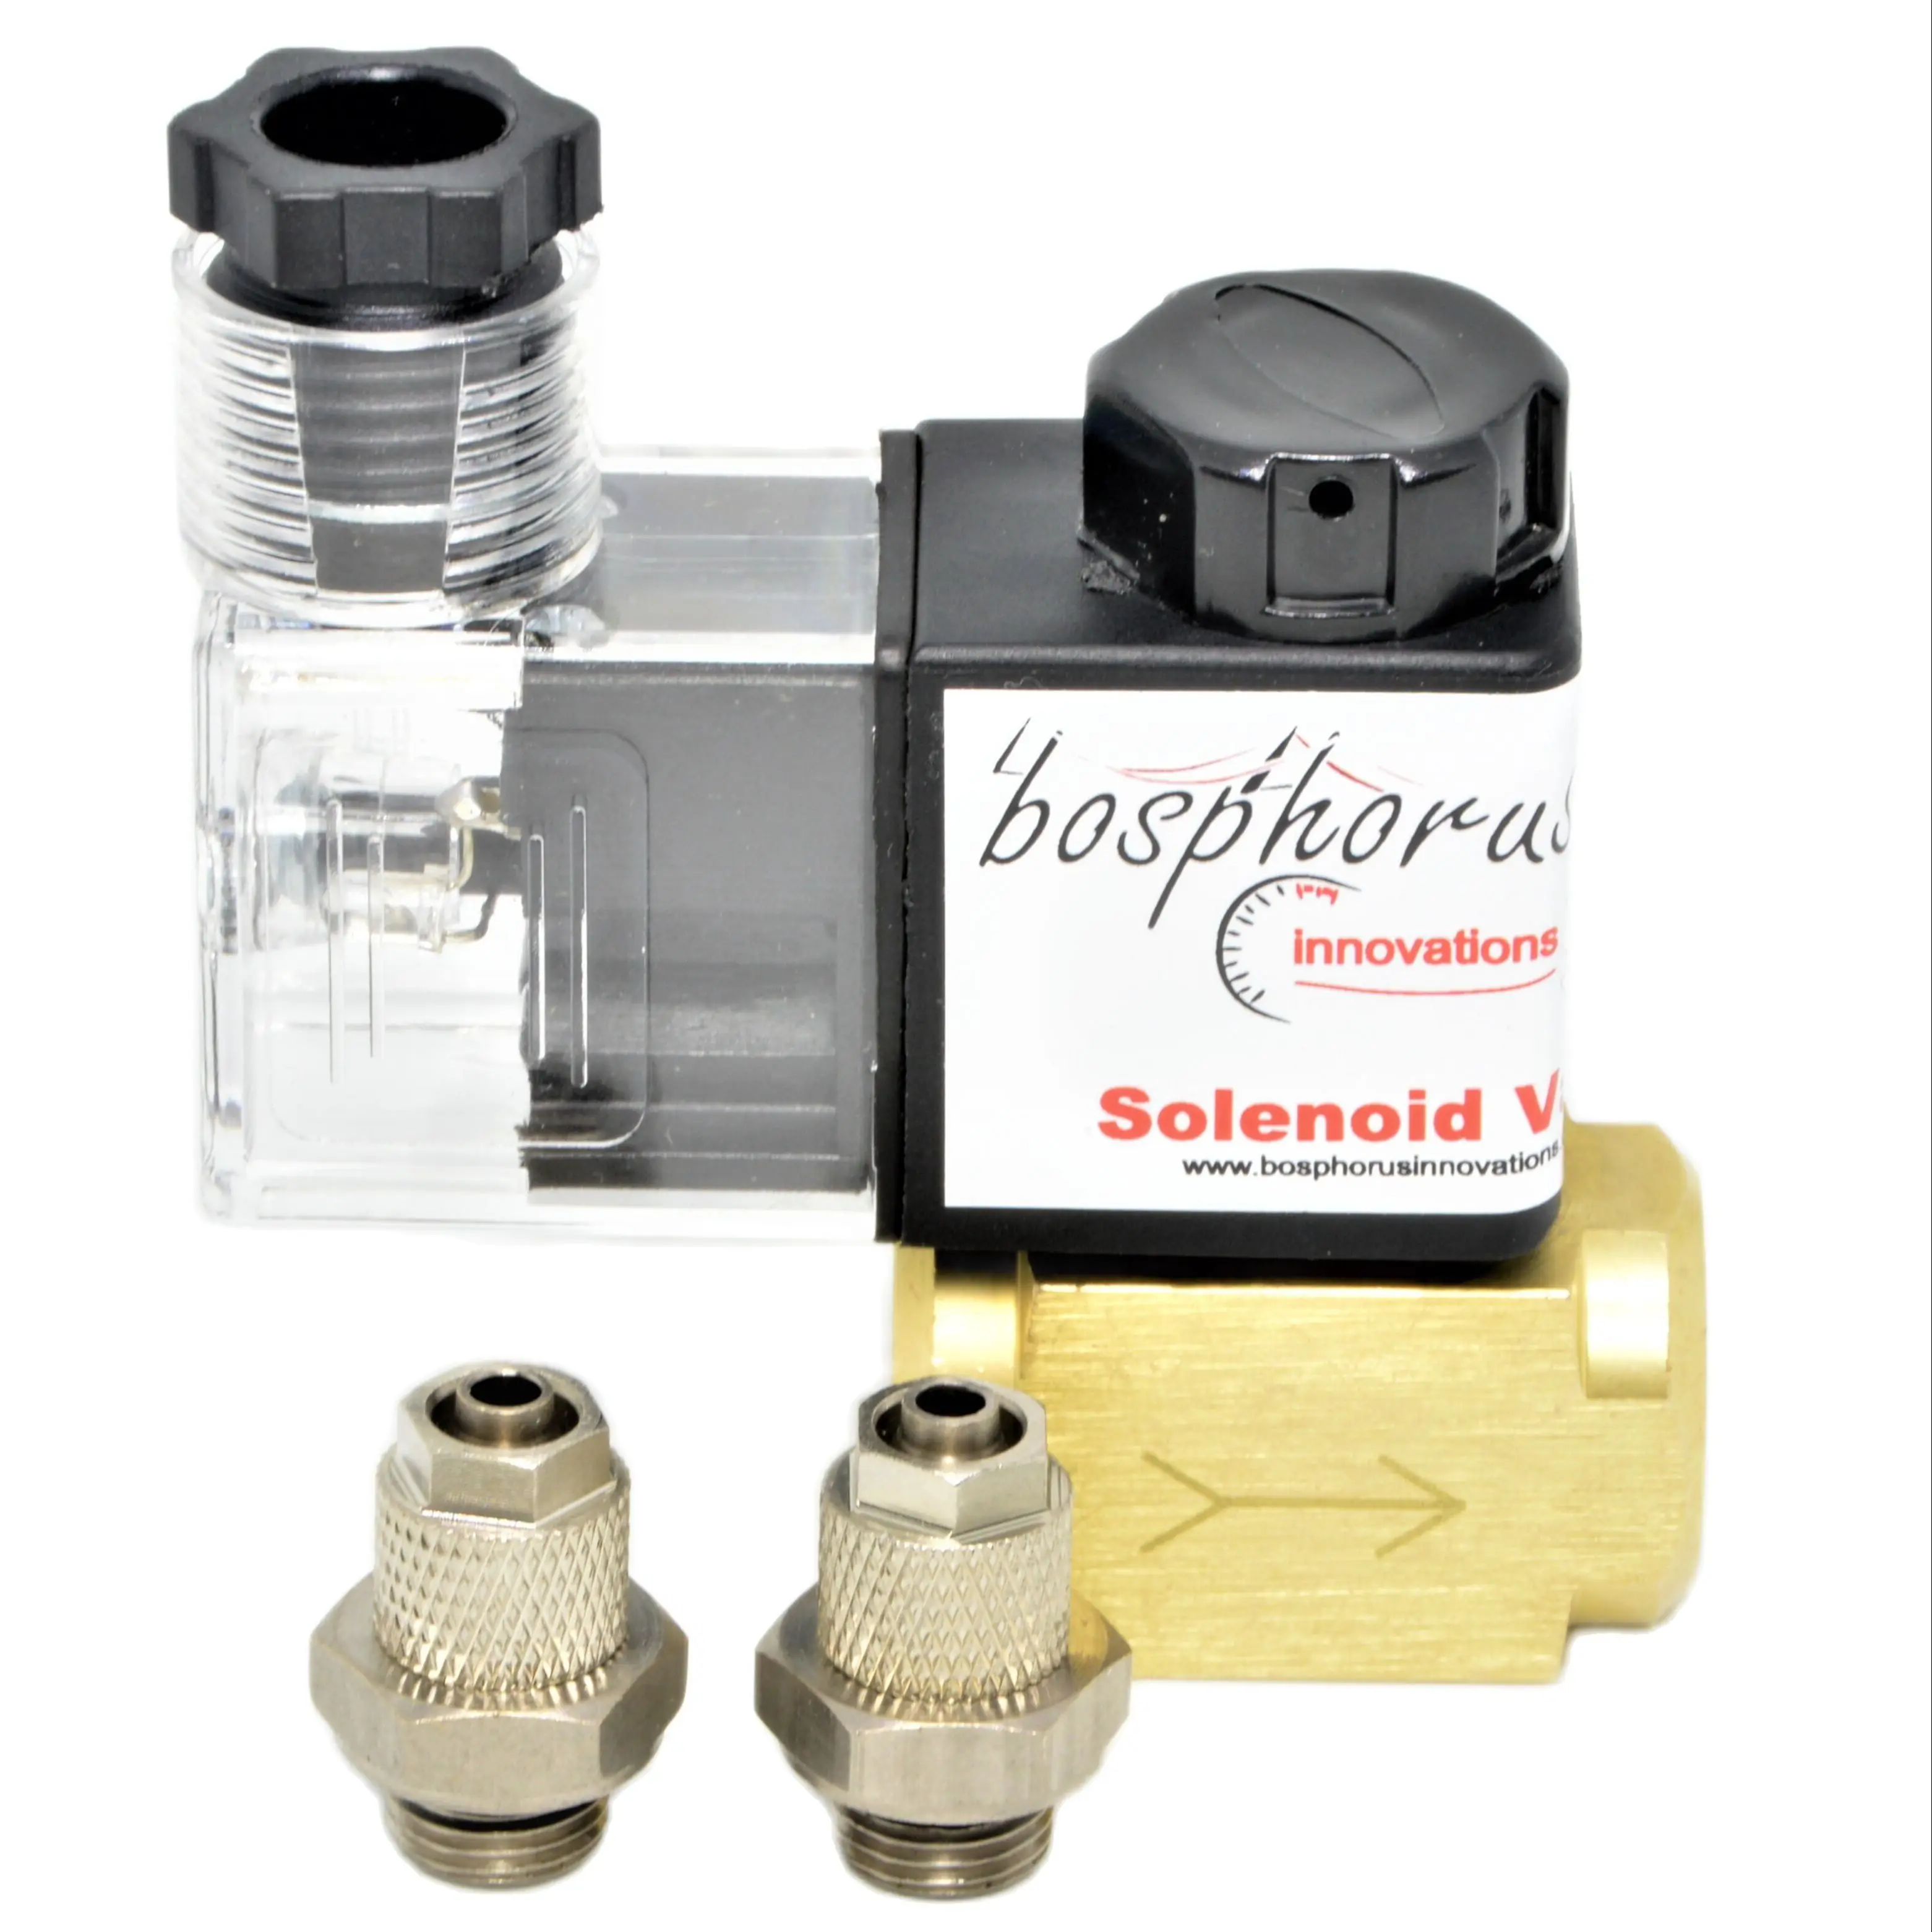 

Solenoid Valve w/Fittings Anti Siphon Back Flow Prevention Water Meth Methanol Alcohol Injection Bosphorus